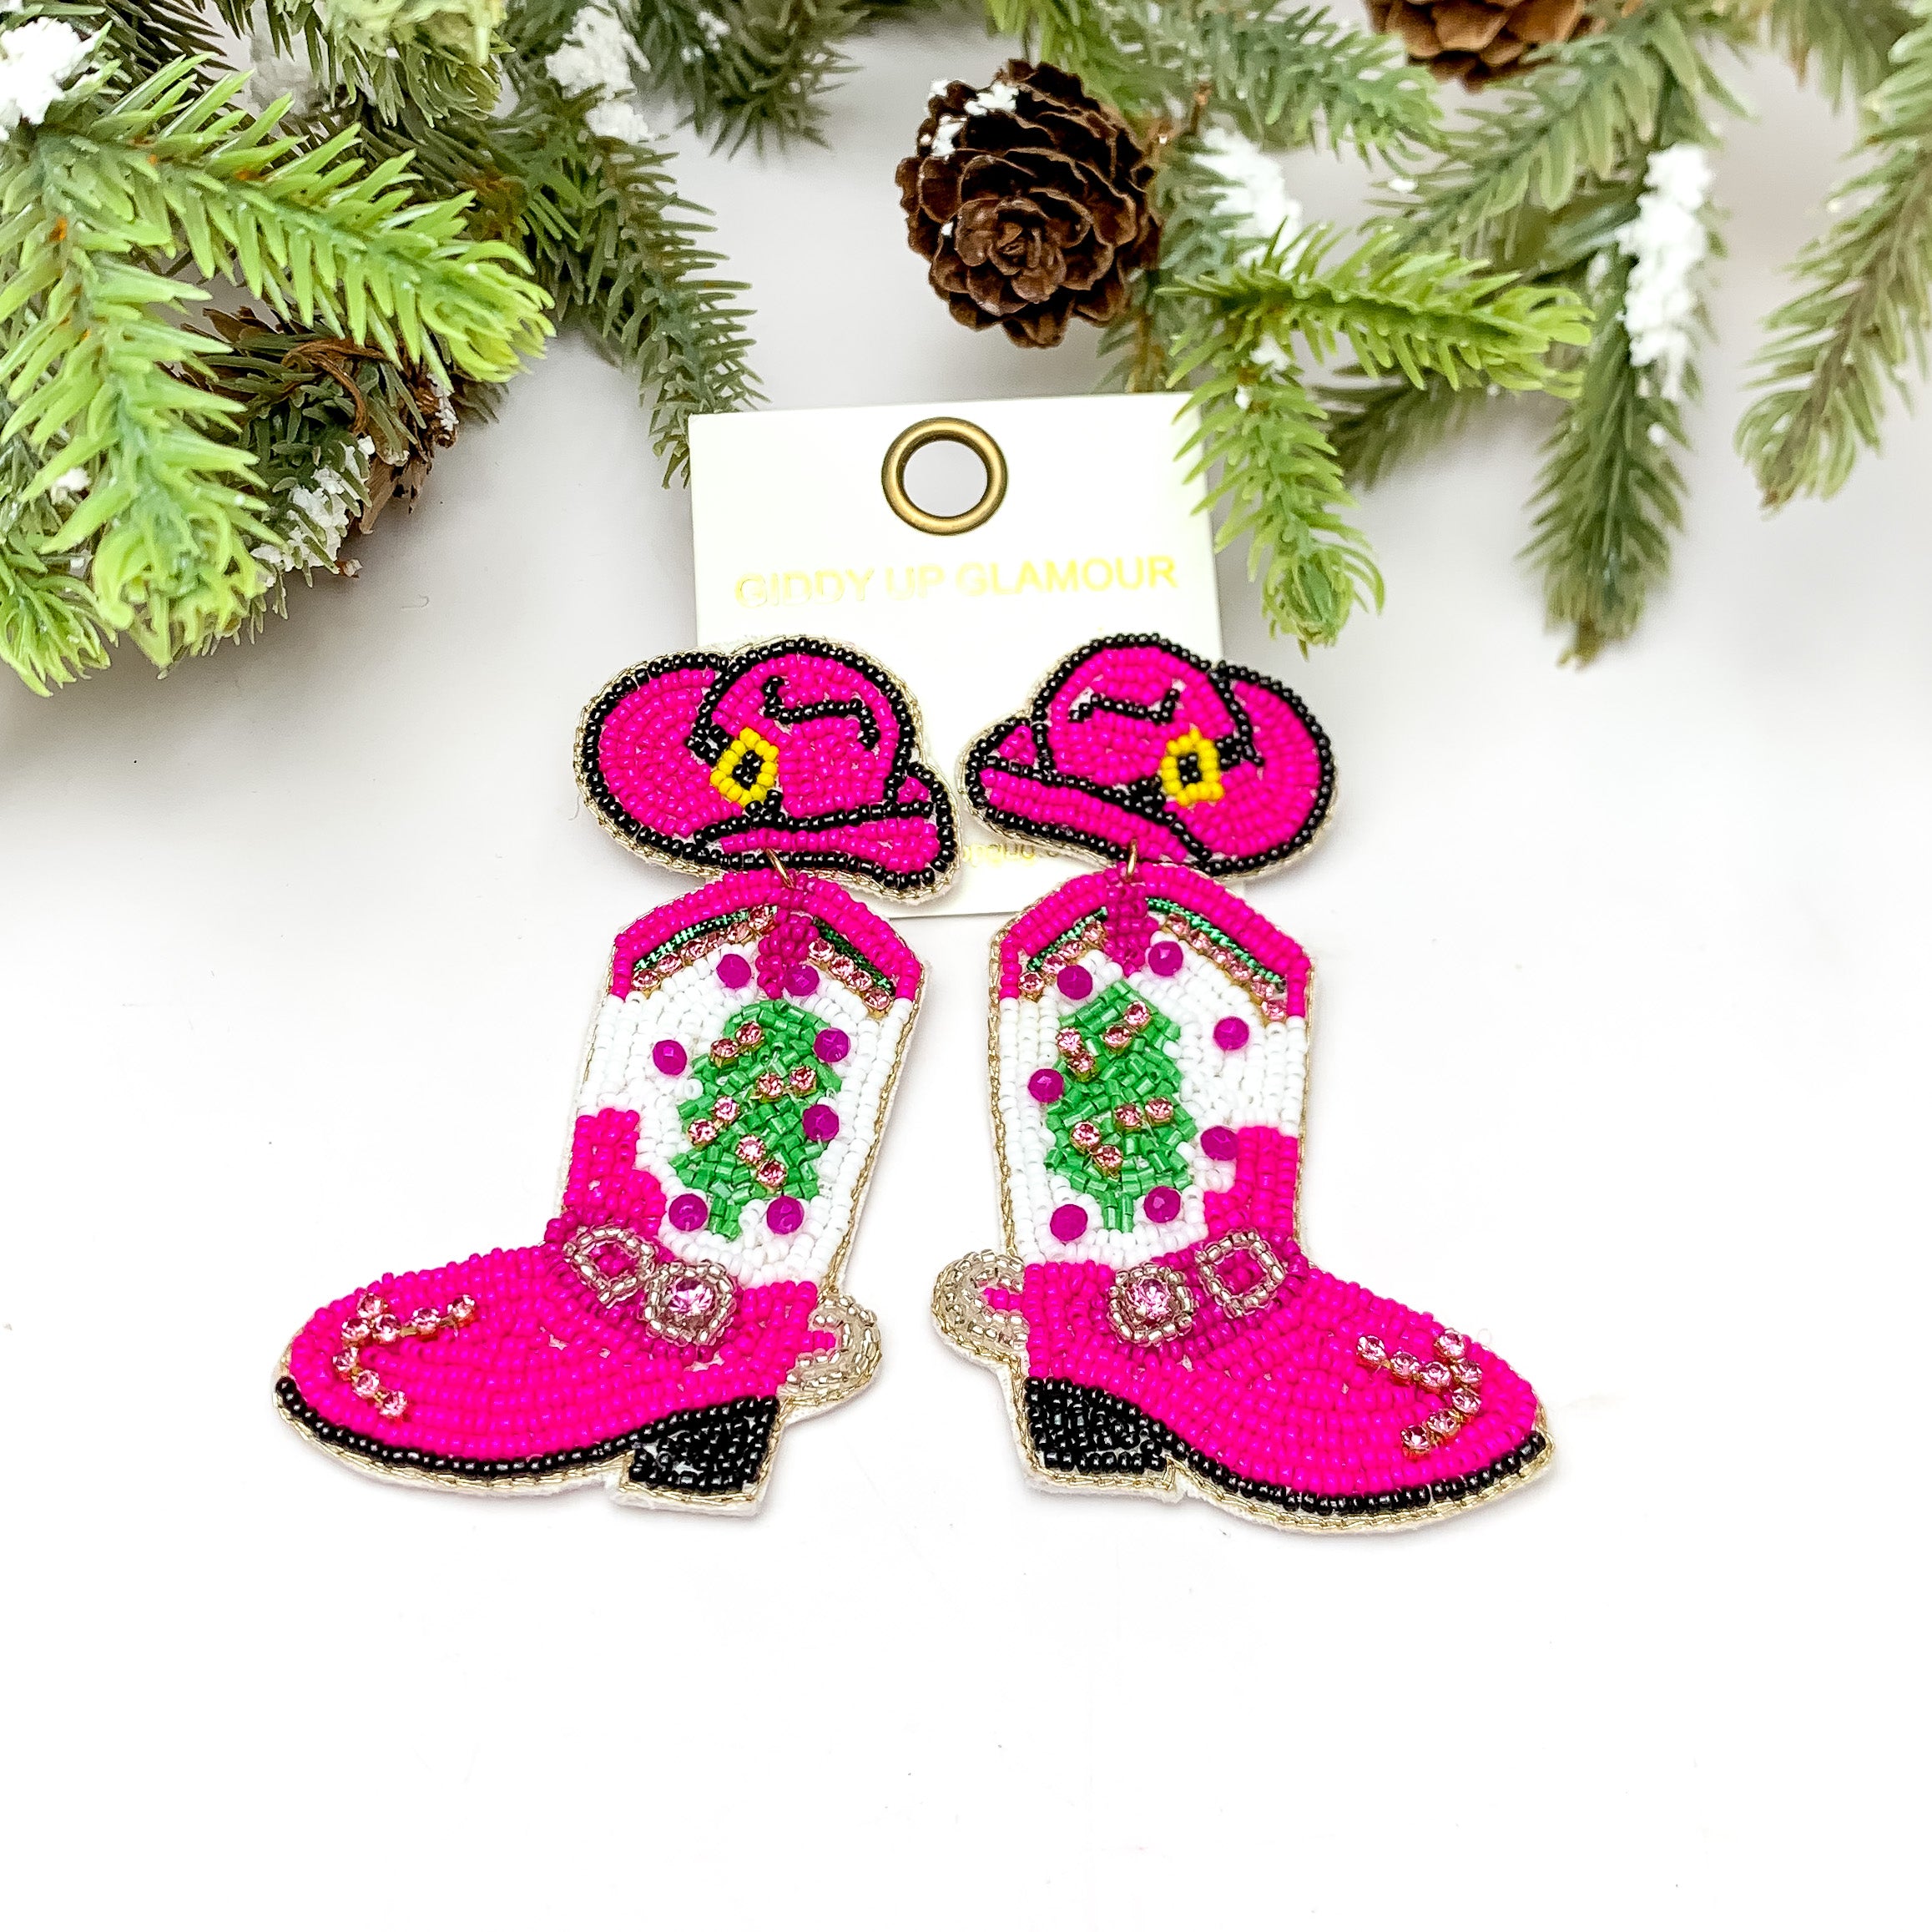 Cowgirl Christmas Beaded Boot Earrings With Hat Post in Pink. These earrings are pictured on a white background with a tree and pine cones at the top.